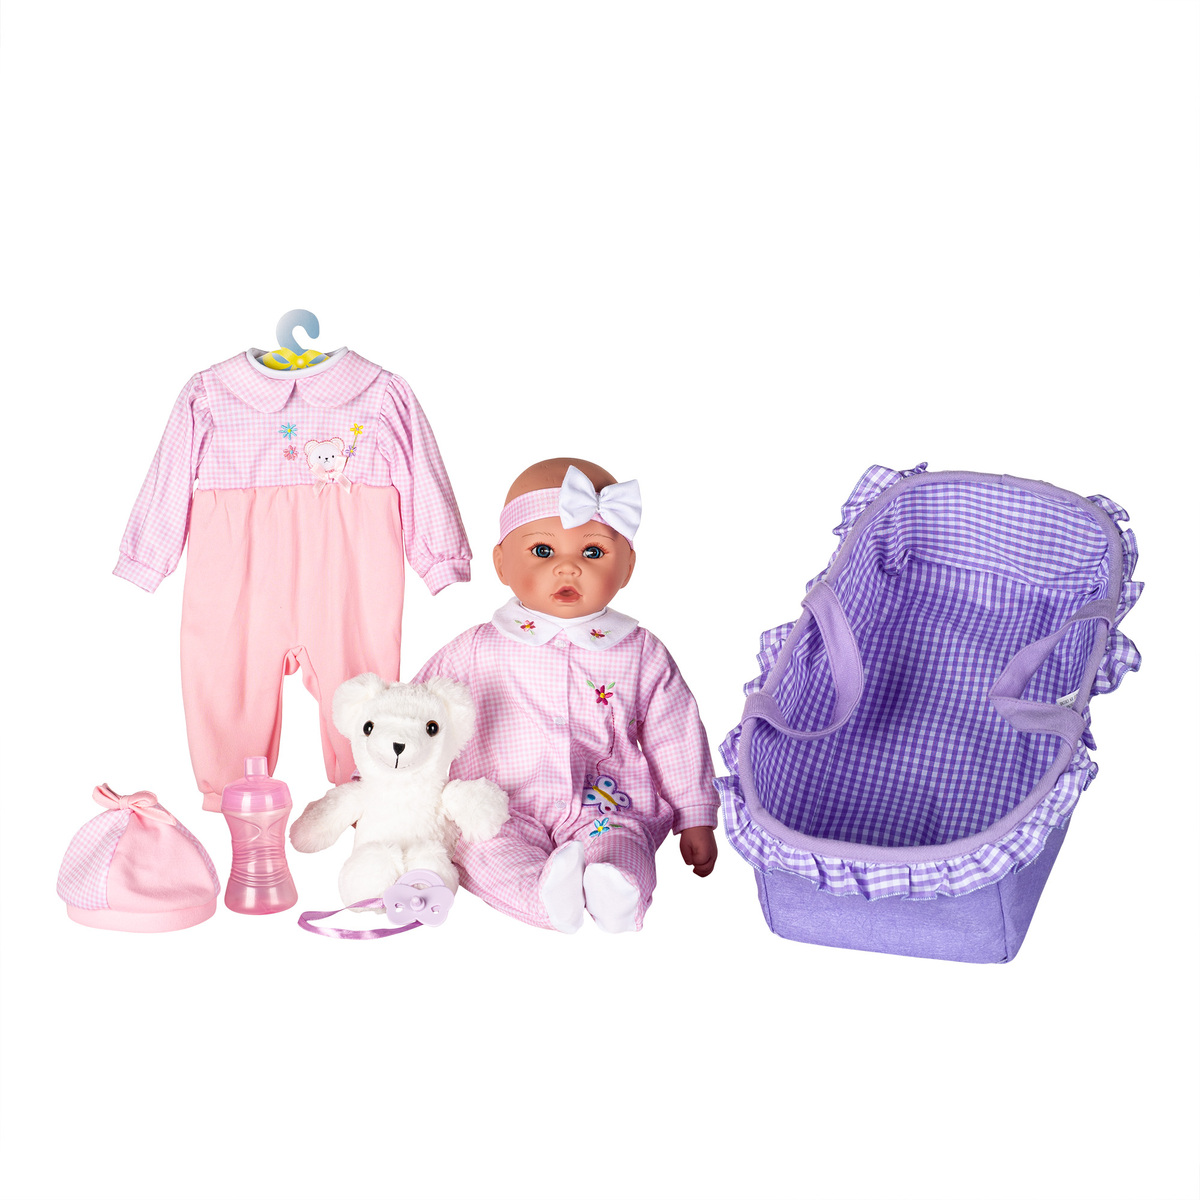 Baby emma doll with accessories